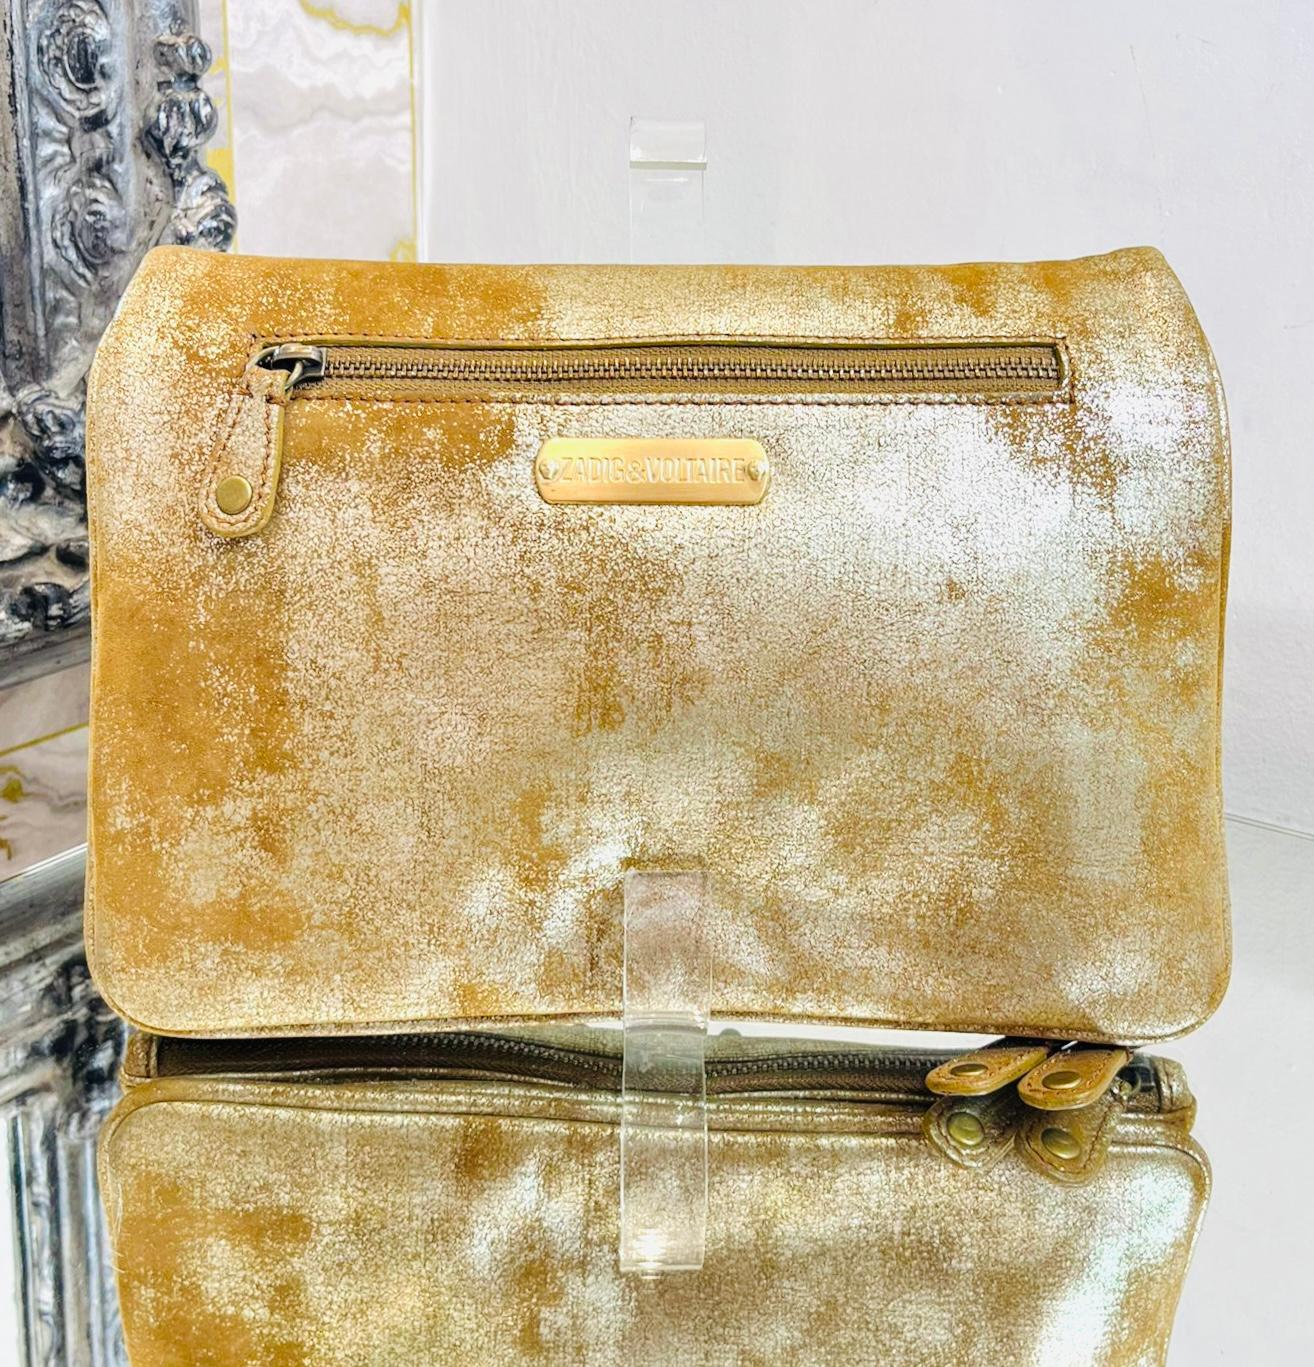 gold zadig and voltaire bag